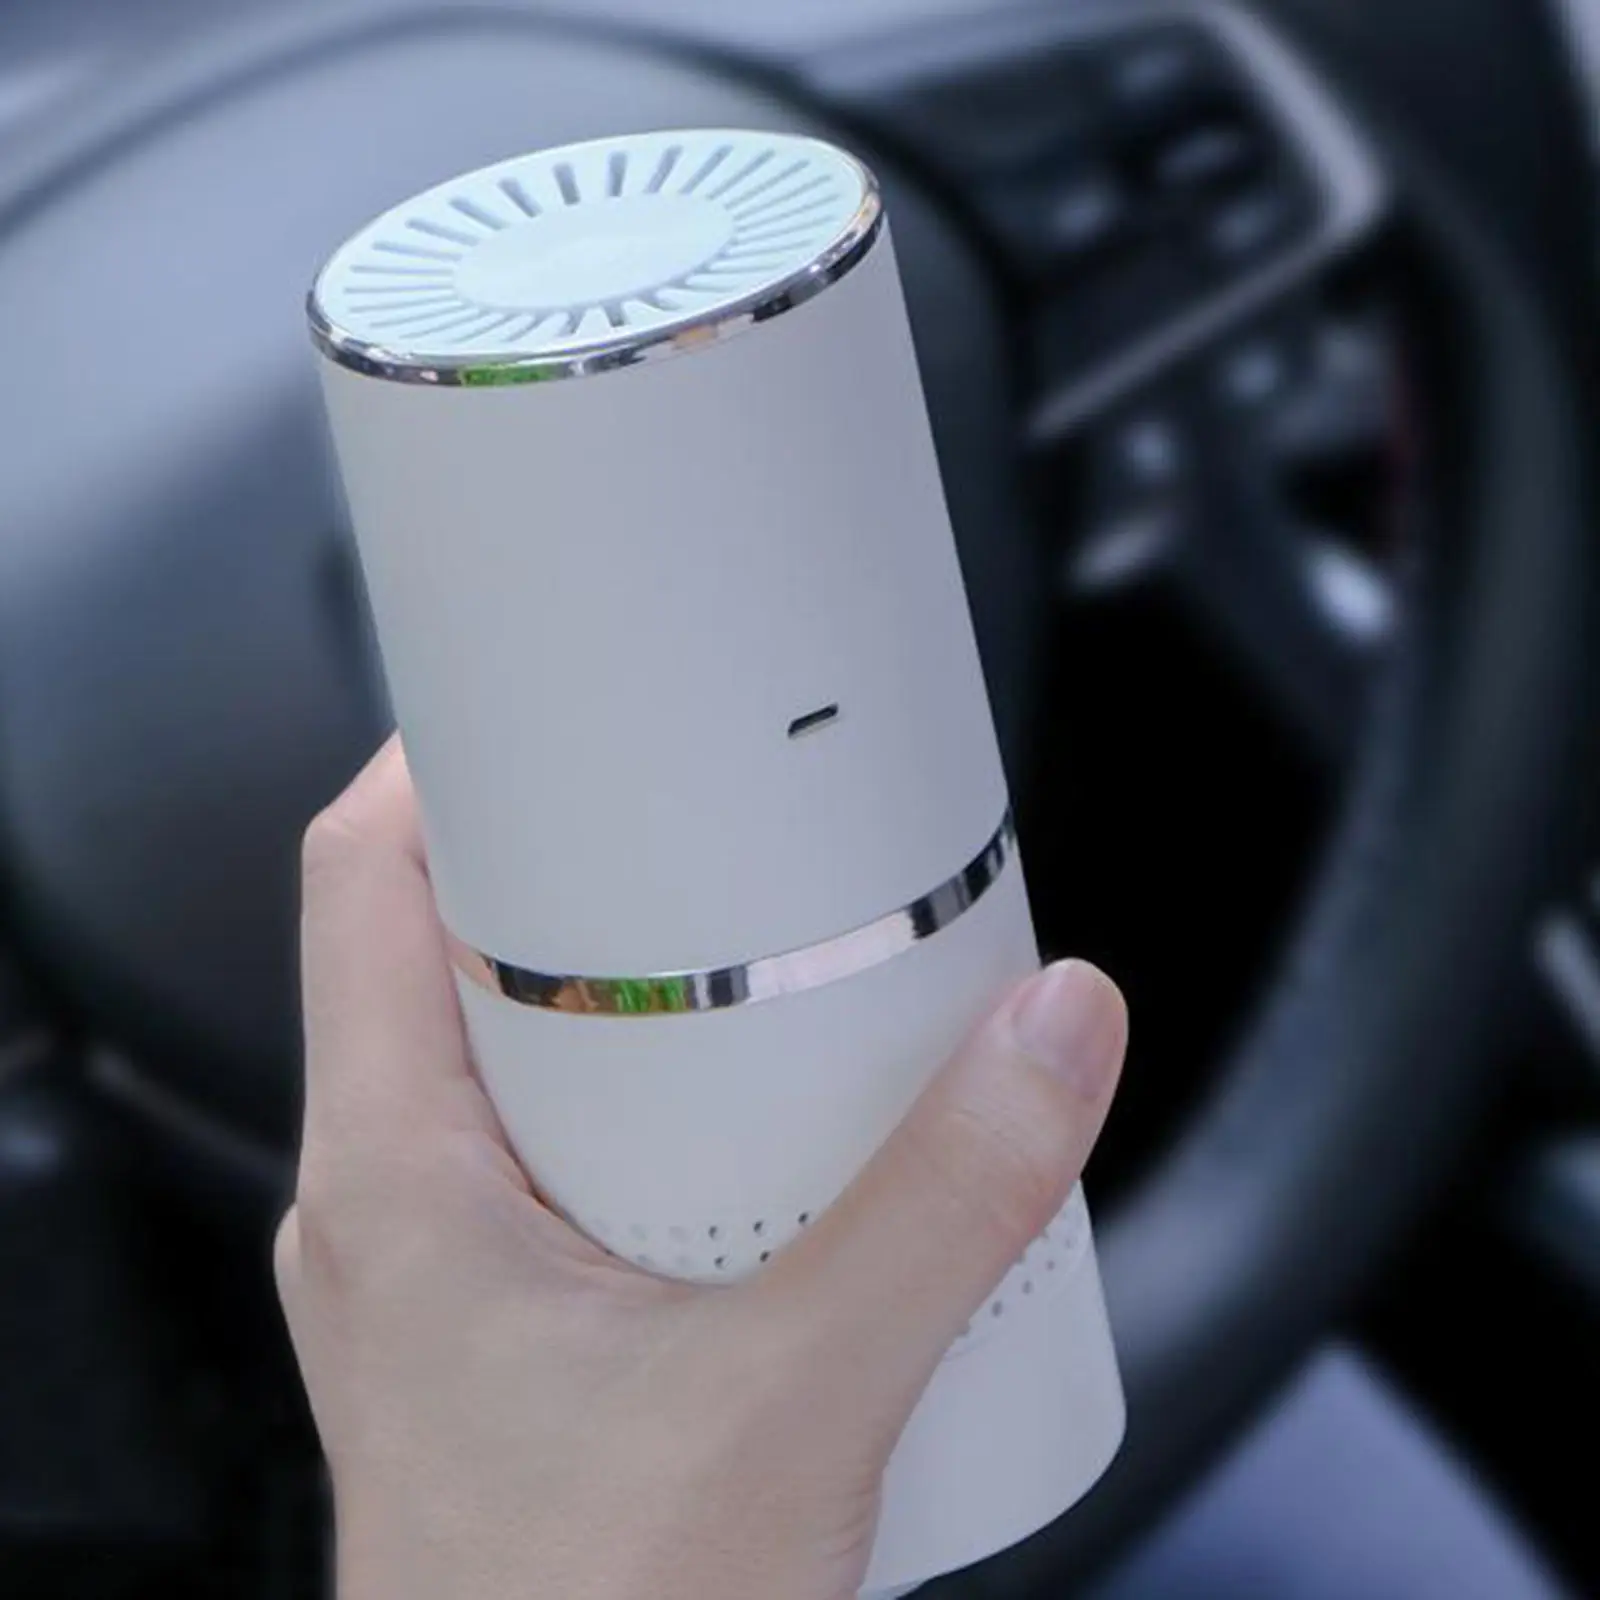 Car Air Purifier Portable Air Cleaner Purifier Remove Dust for Home Reduce Odor from Mold Smoke Pollen